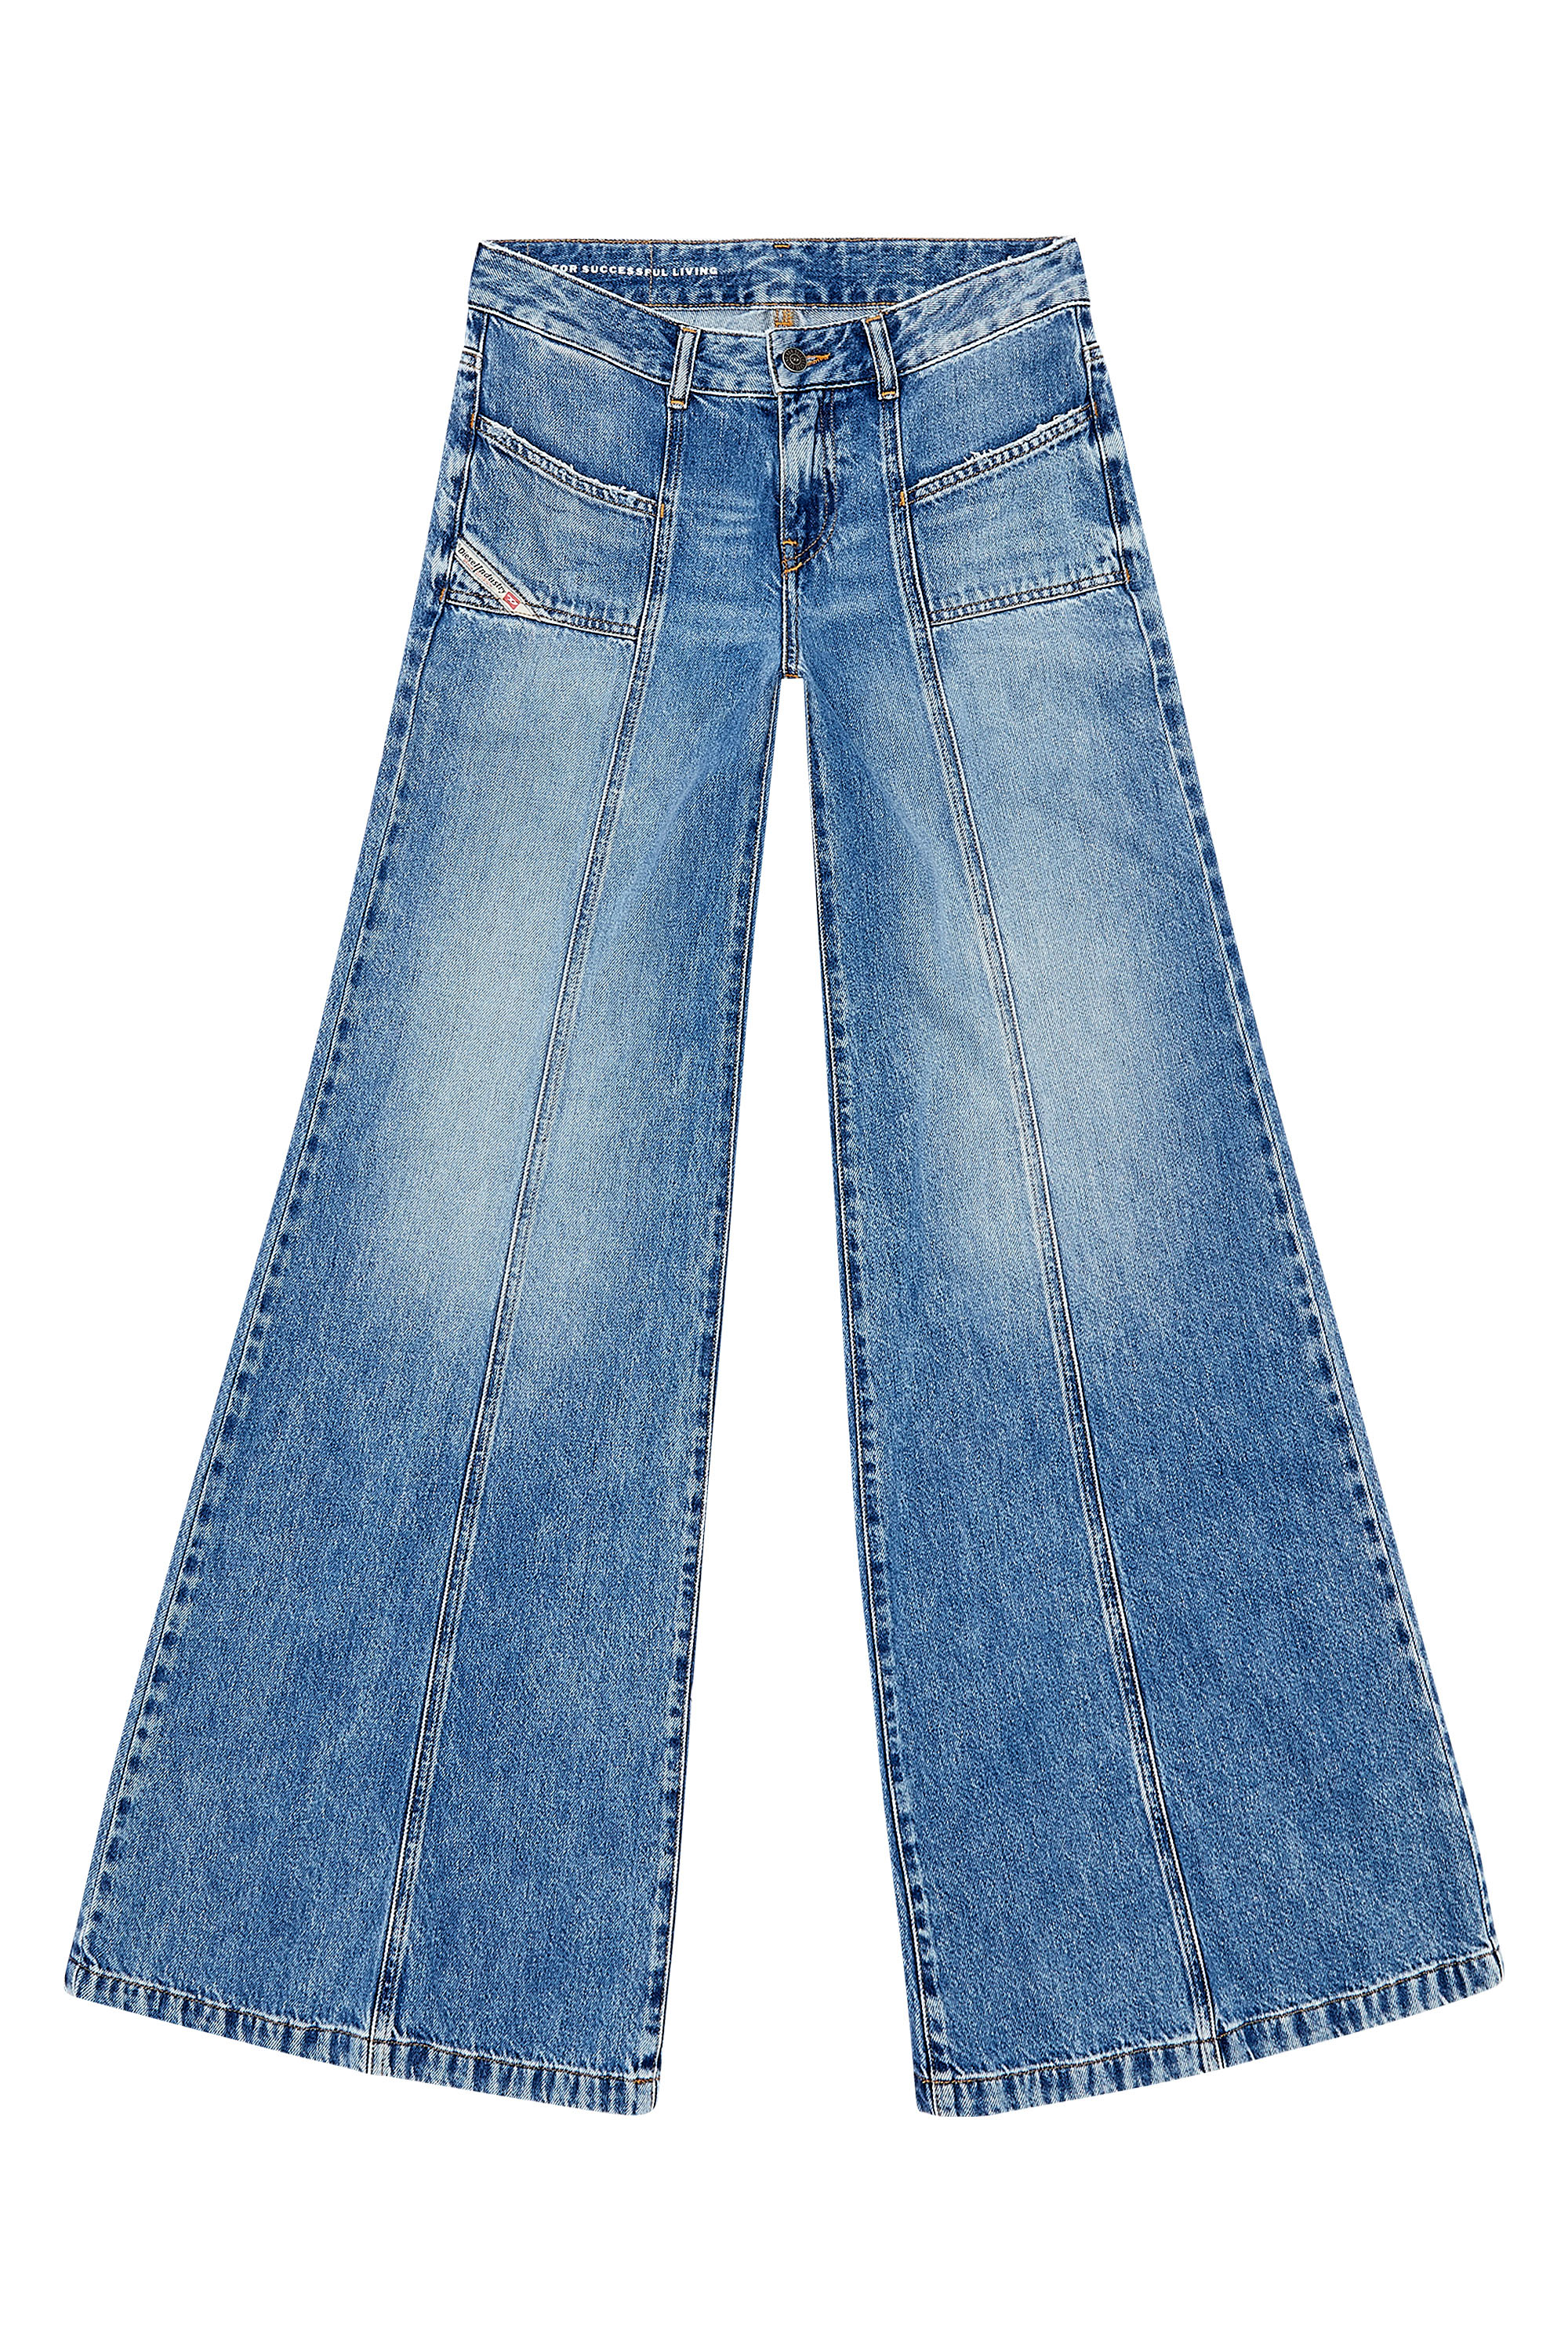 Diesel - Bootcut and Flare Jeans D-Akii 09H95, Mujer Bootcut y Flare Jeans - D-Akii in Azul marino - Image 5